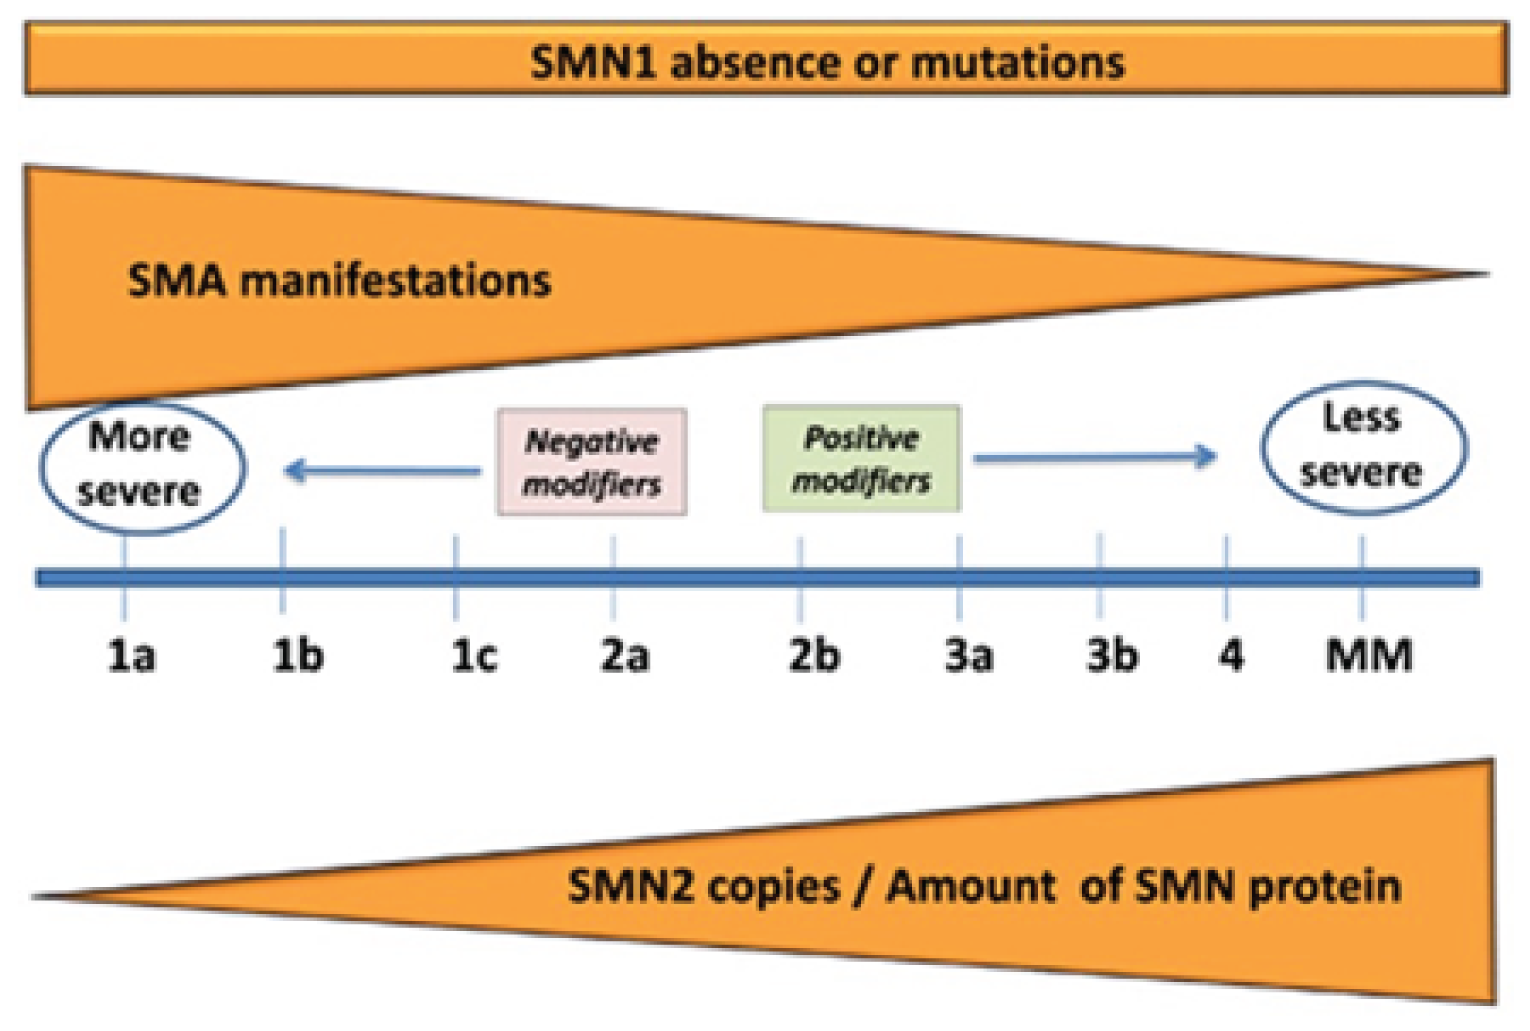 Spectrum of SMA manifestation based on type, where type I is associated with more severe disease, and type IV is associated with less severe disease. Within this spectrum, the more severe the disease, the fewer copies of SMN2 there are, less amount of SMN protein is available.